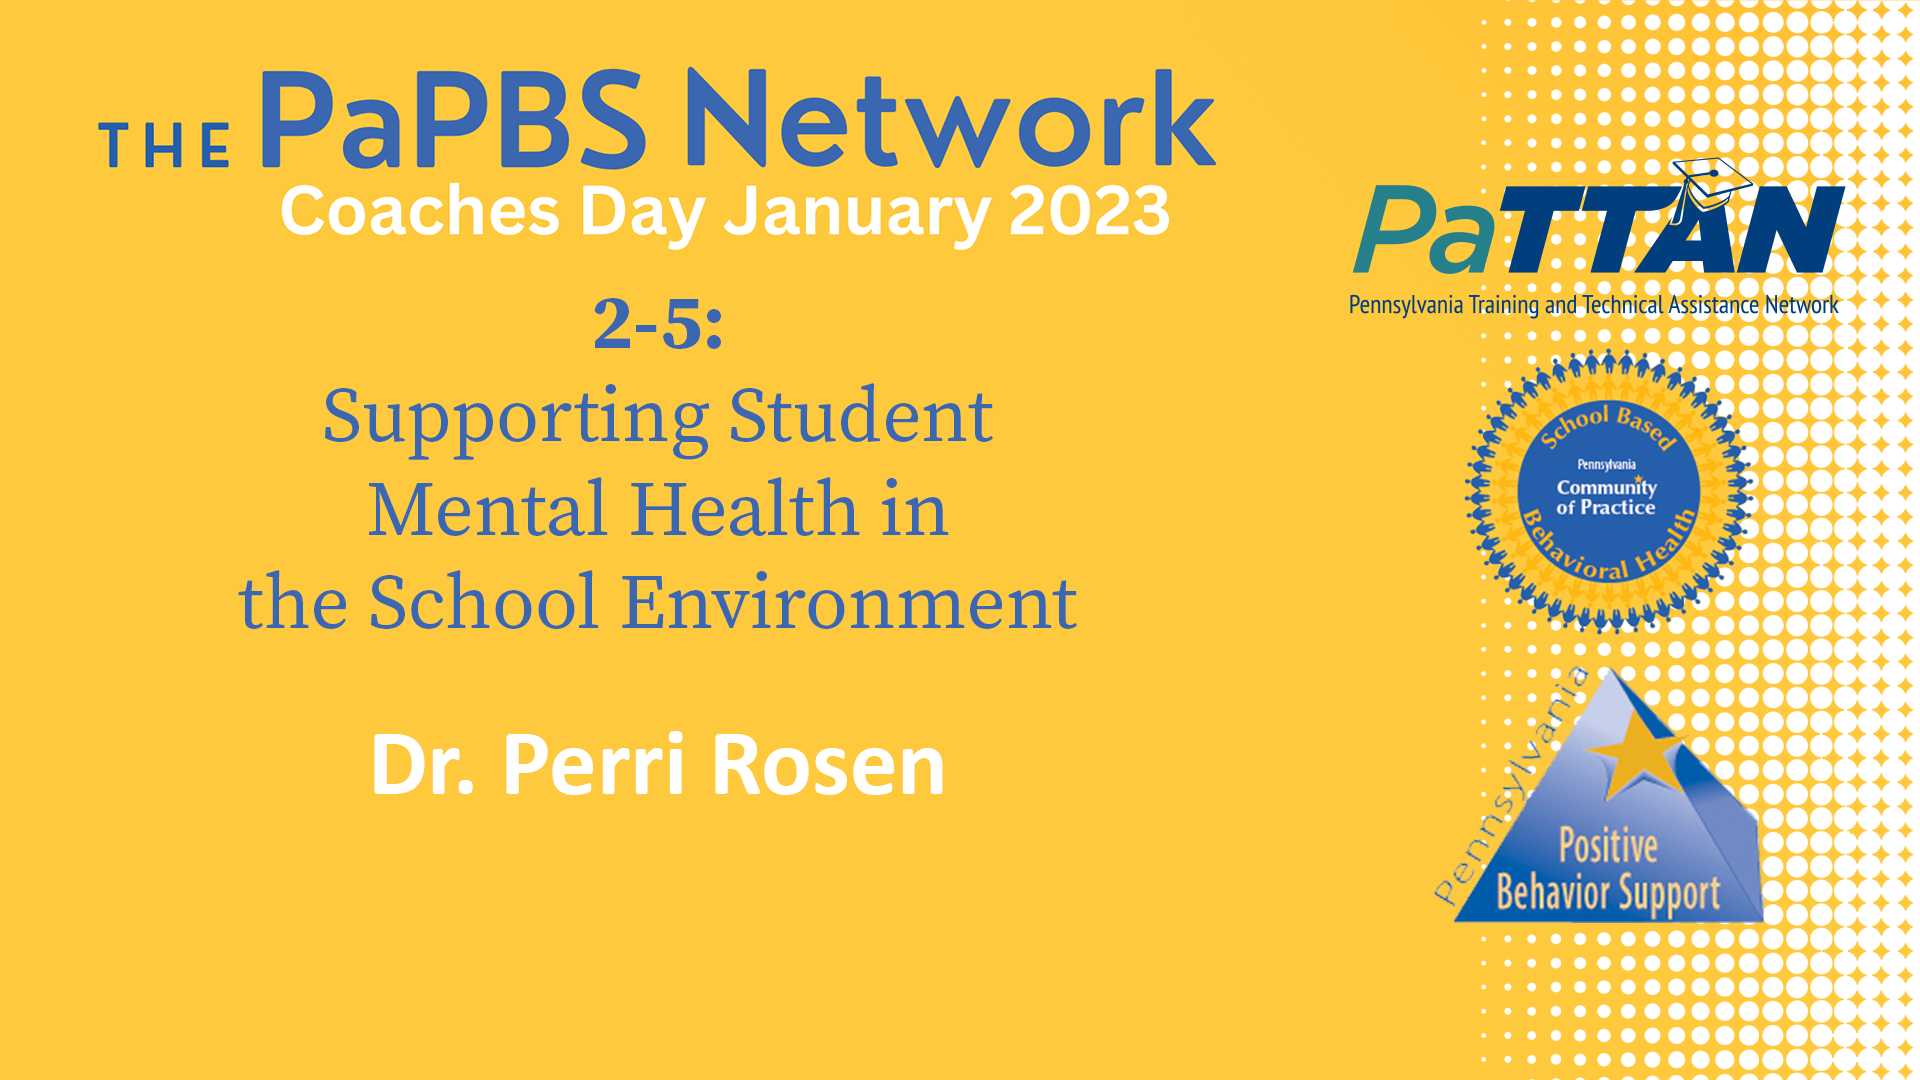 2-5: Supporting Student Mental Health in the School Environment | 2023 PaPBS Coaches Day